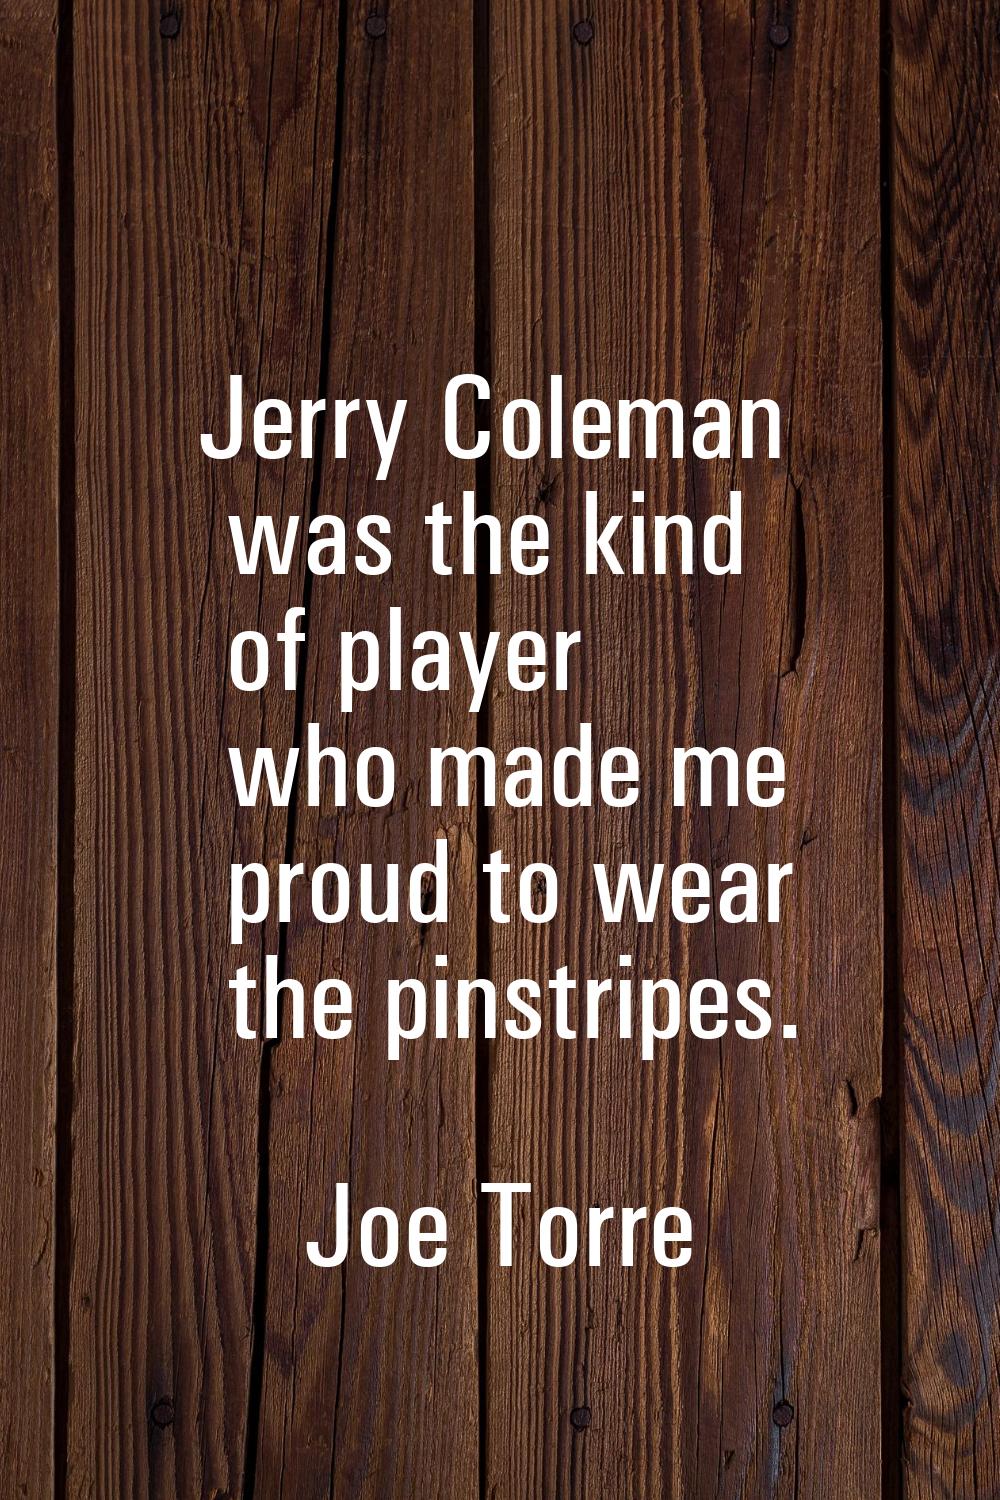 Jerry Coleman was the kind of player who made me proud to wear the pinstripes.